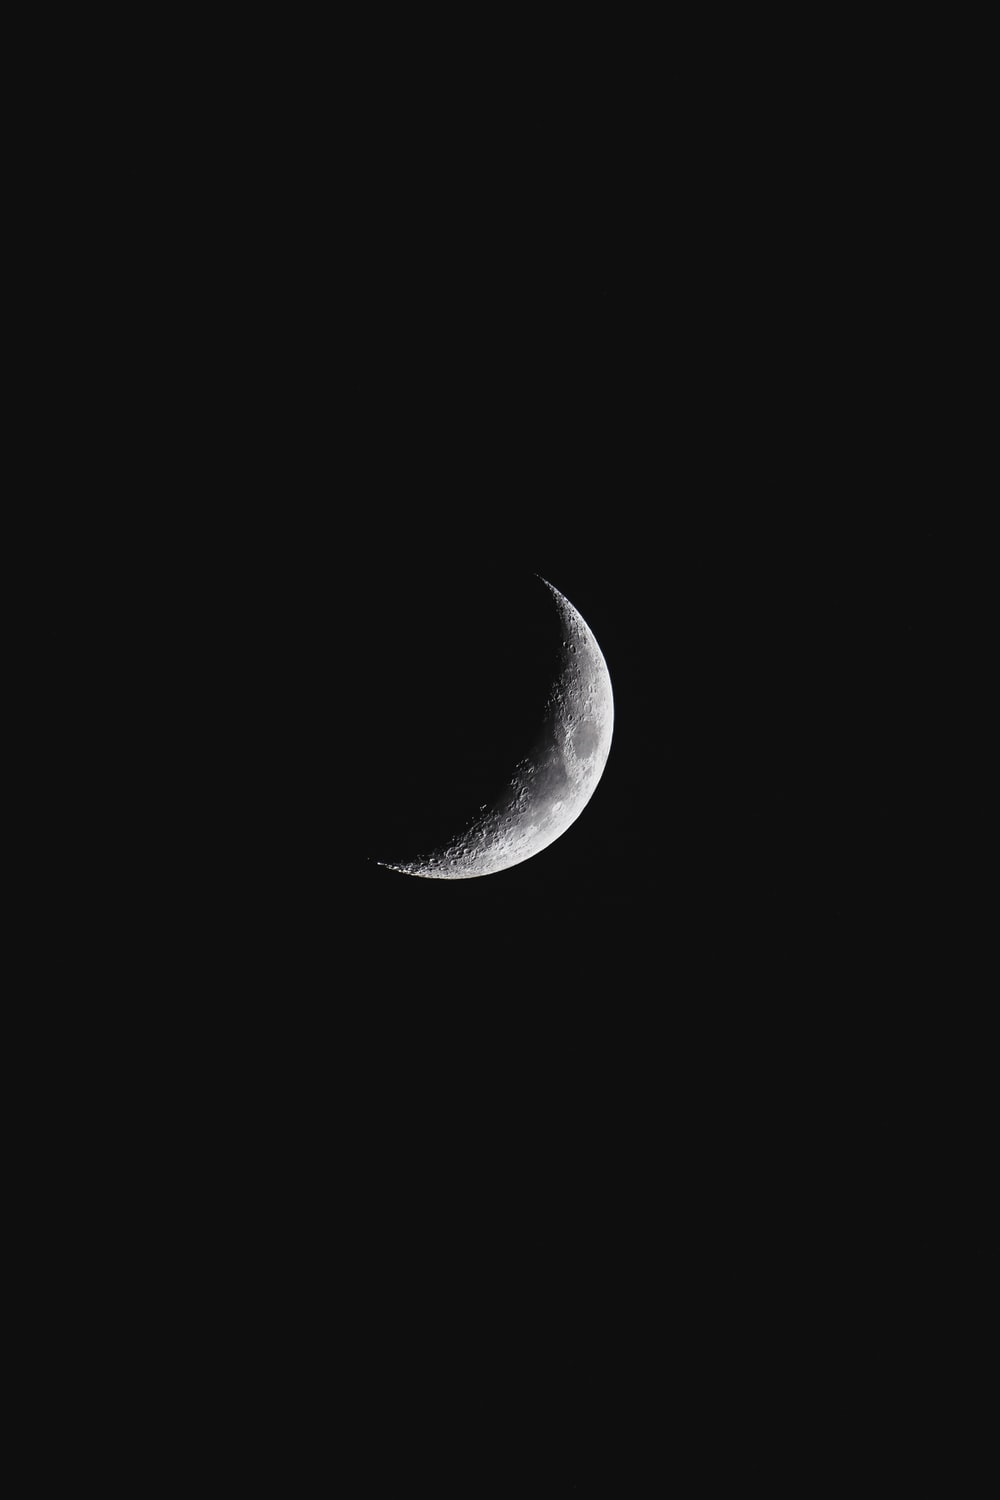 Black And White Moon Picture. Download Free Image